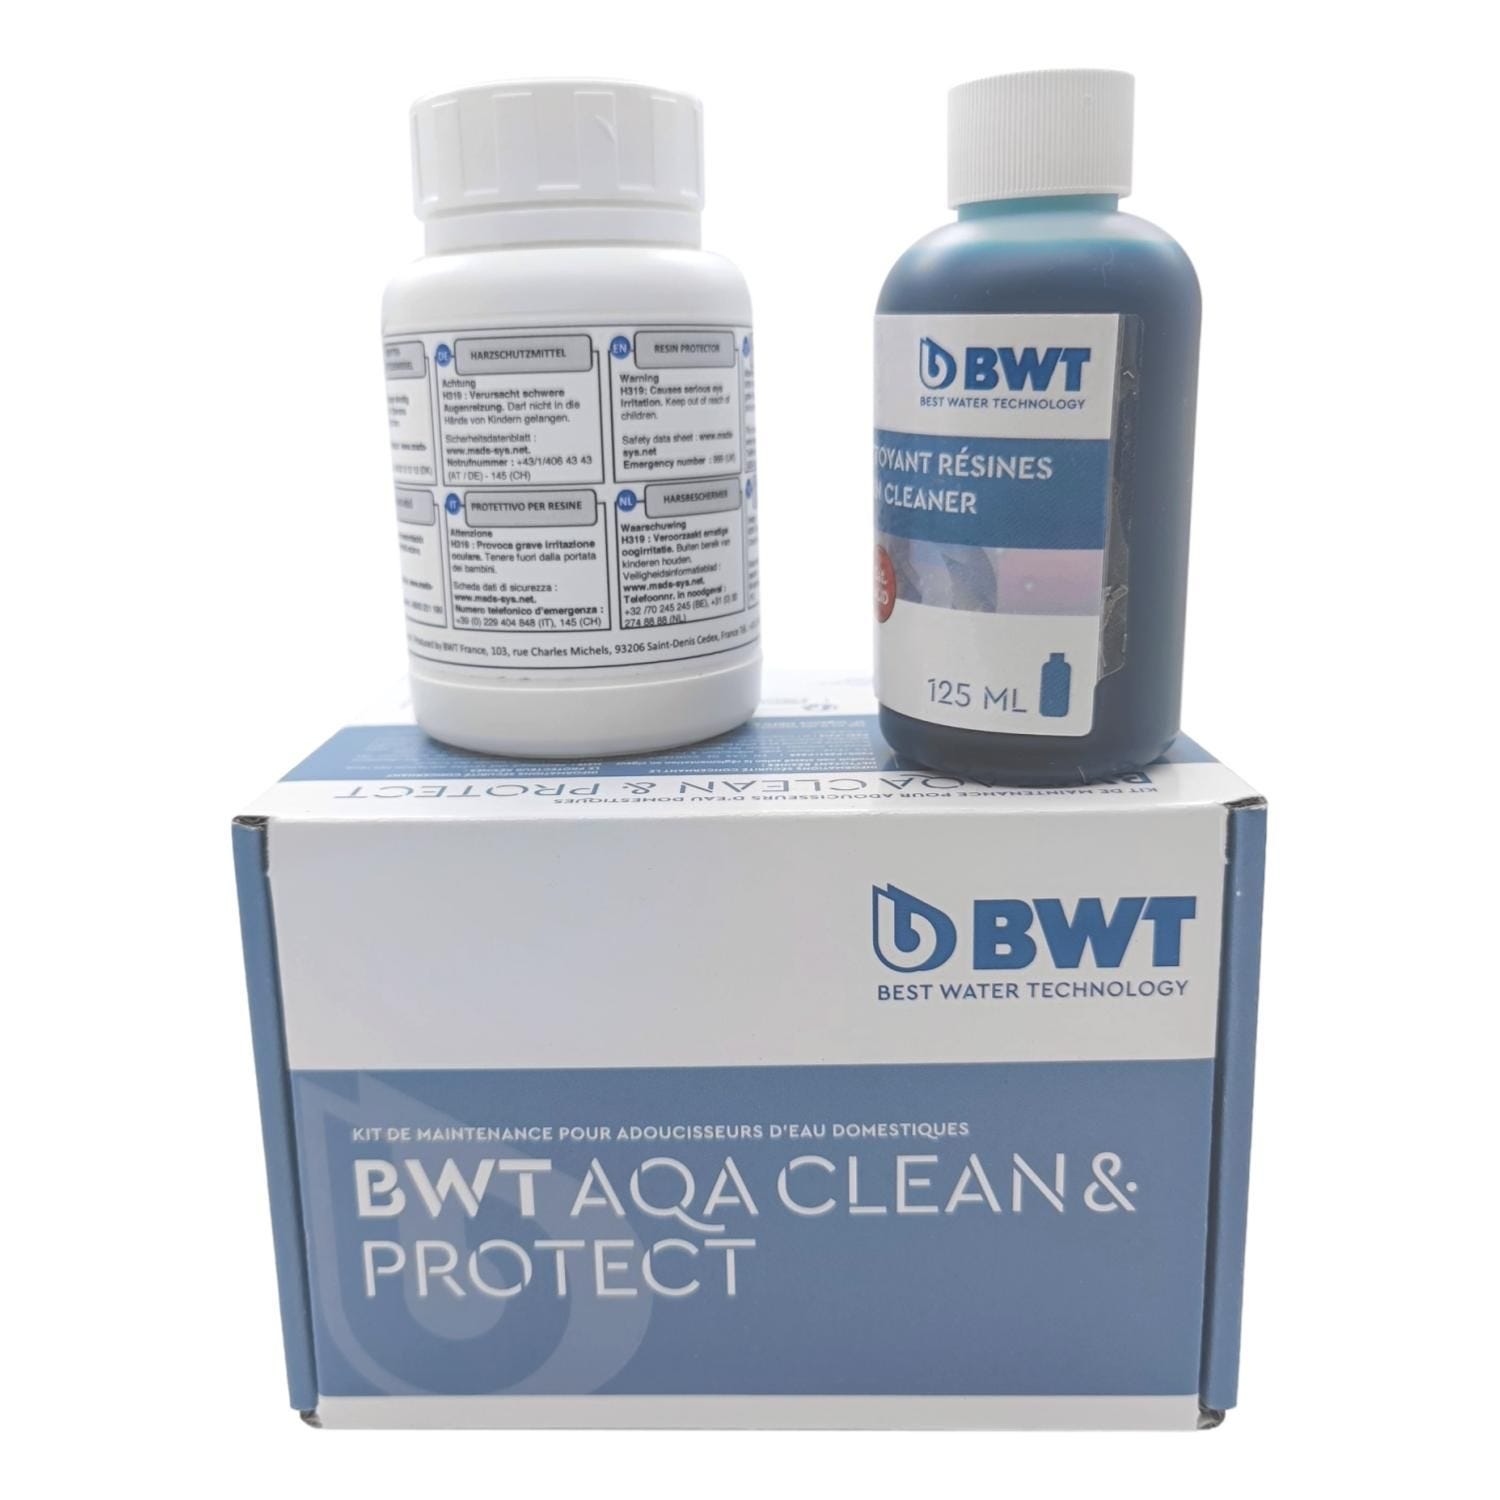 Coffret AQA clean and protect - BWT 1